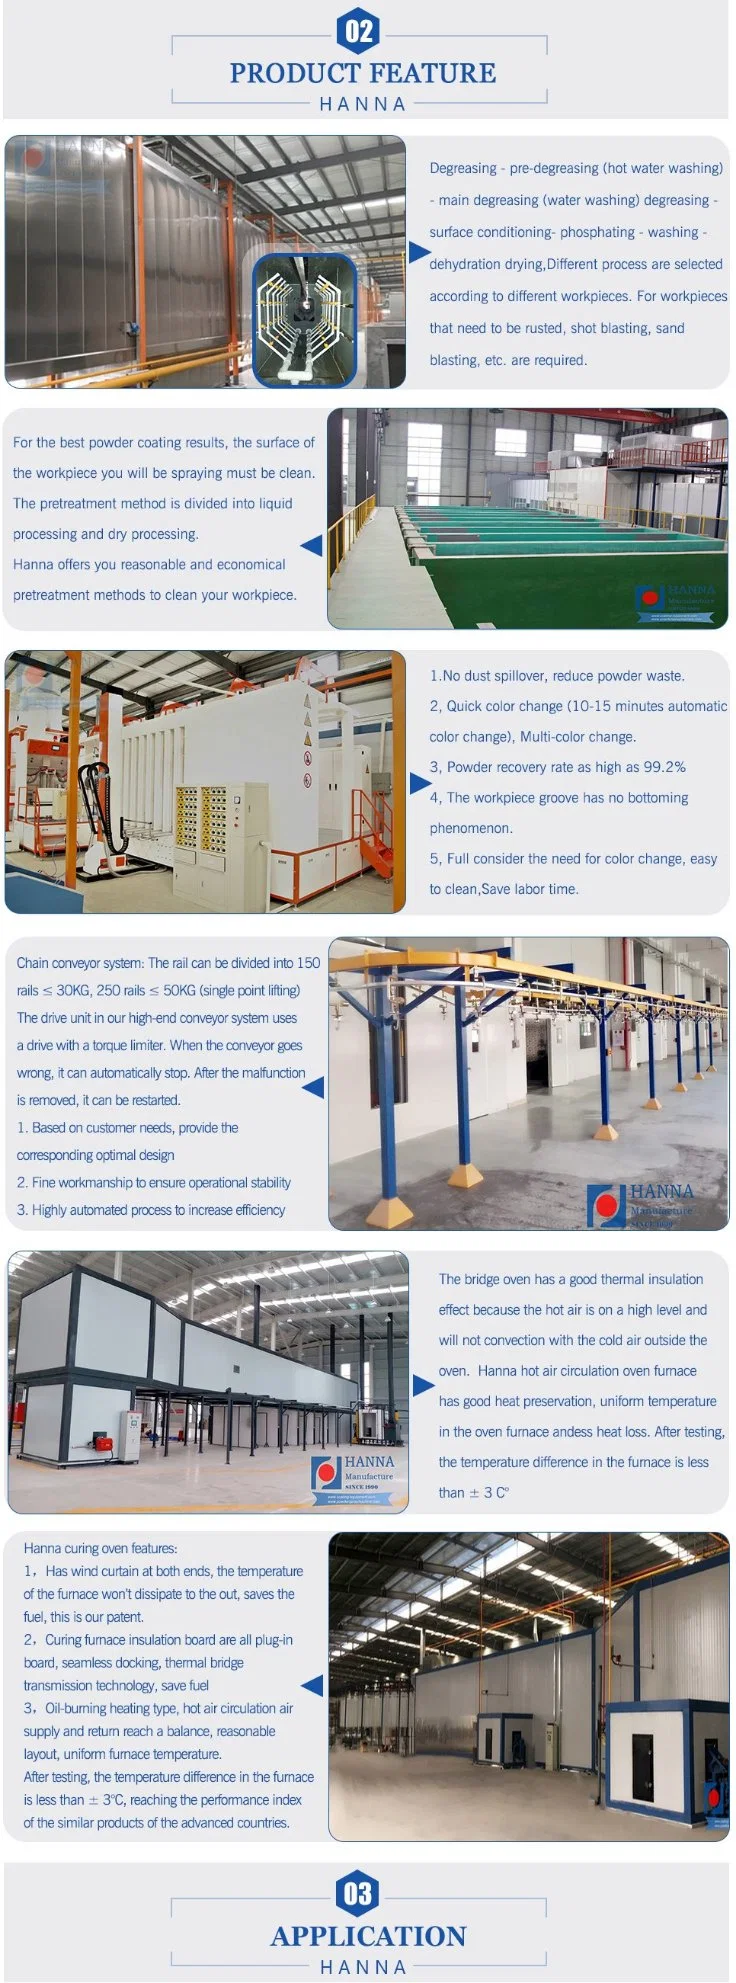 Powder Coating Business for Sale